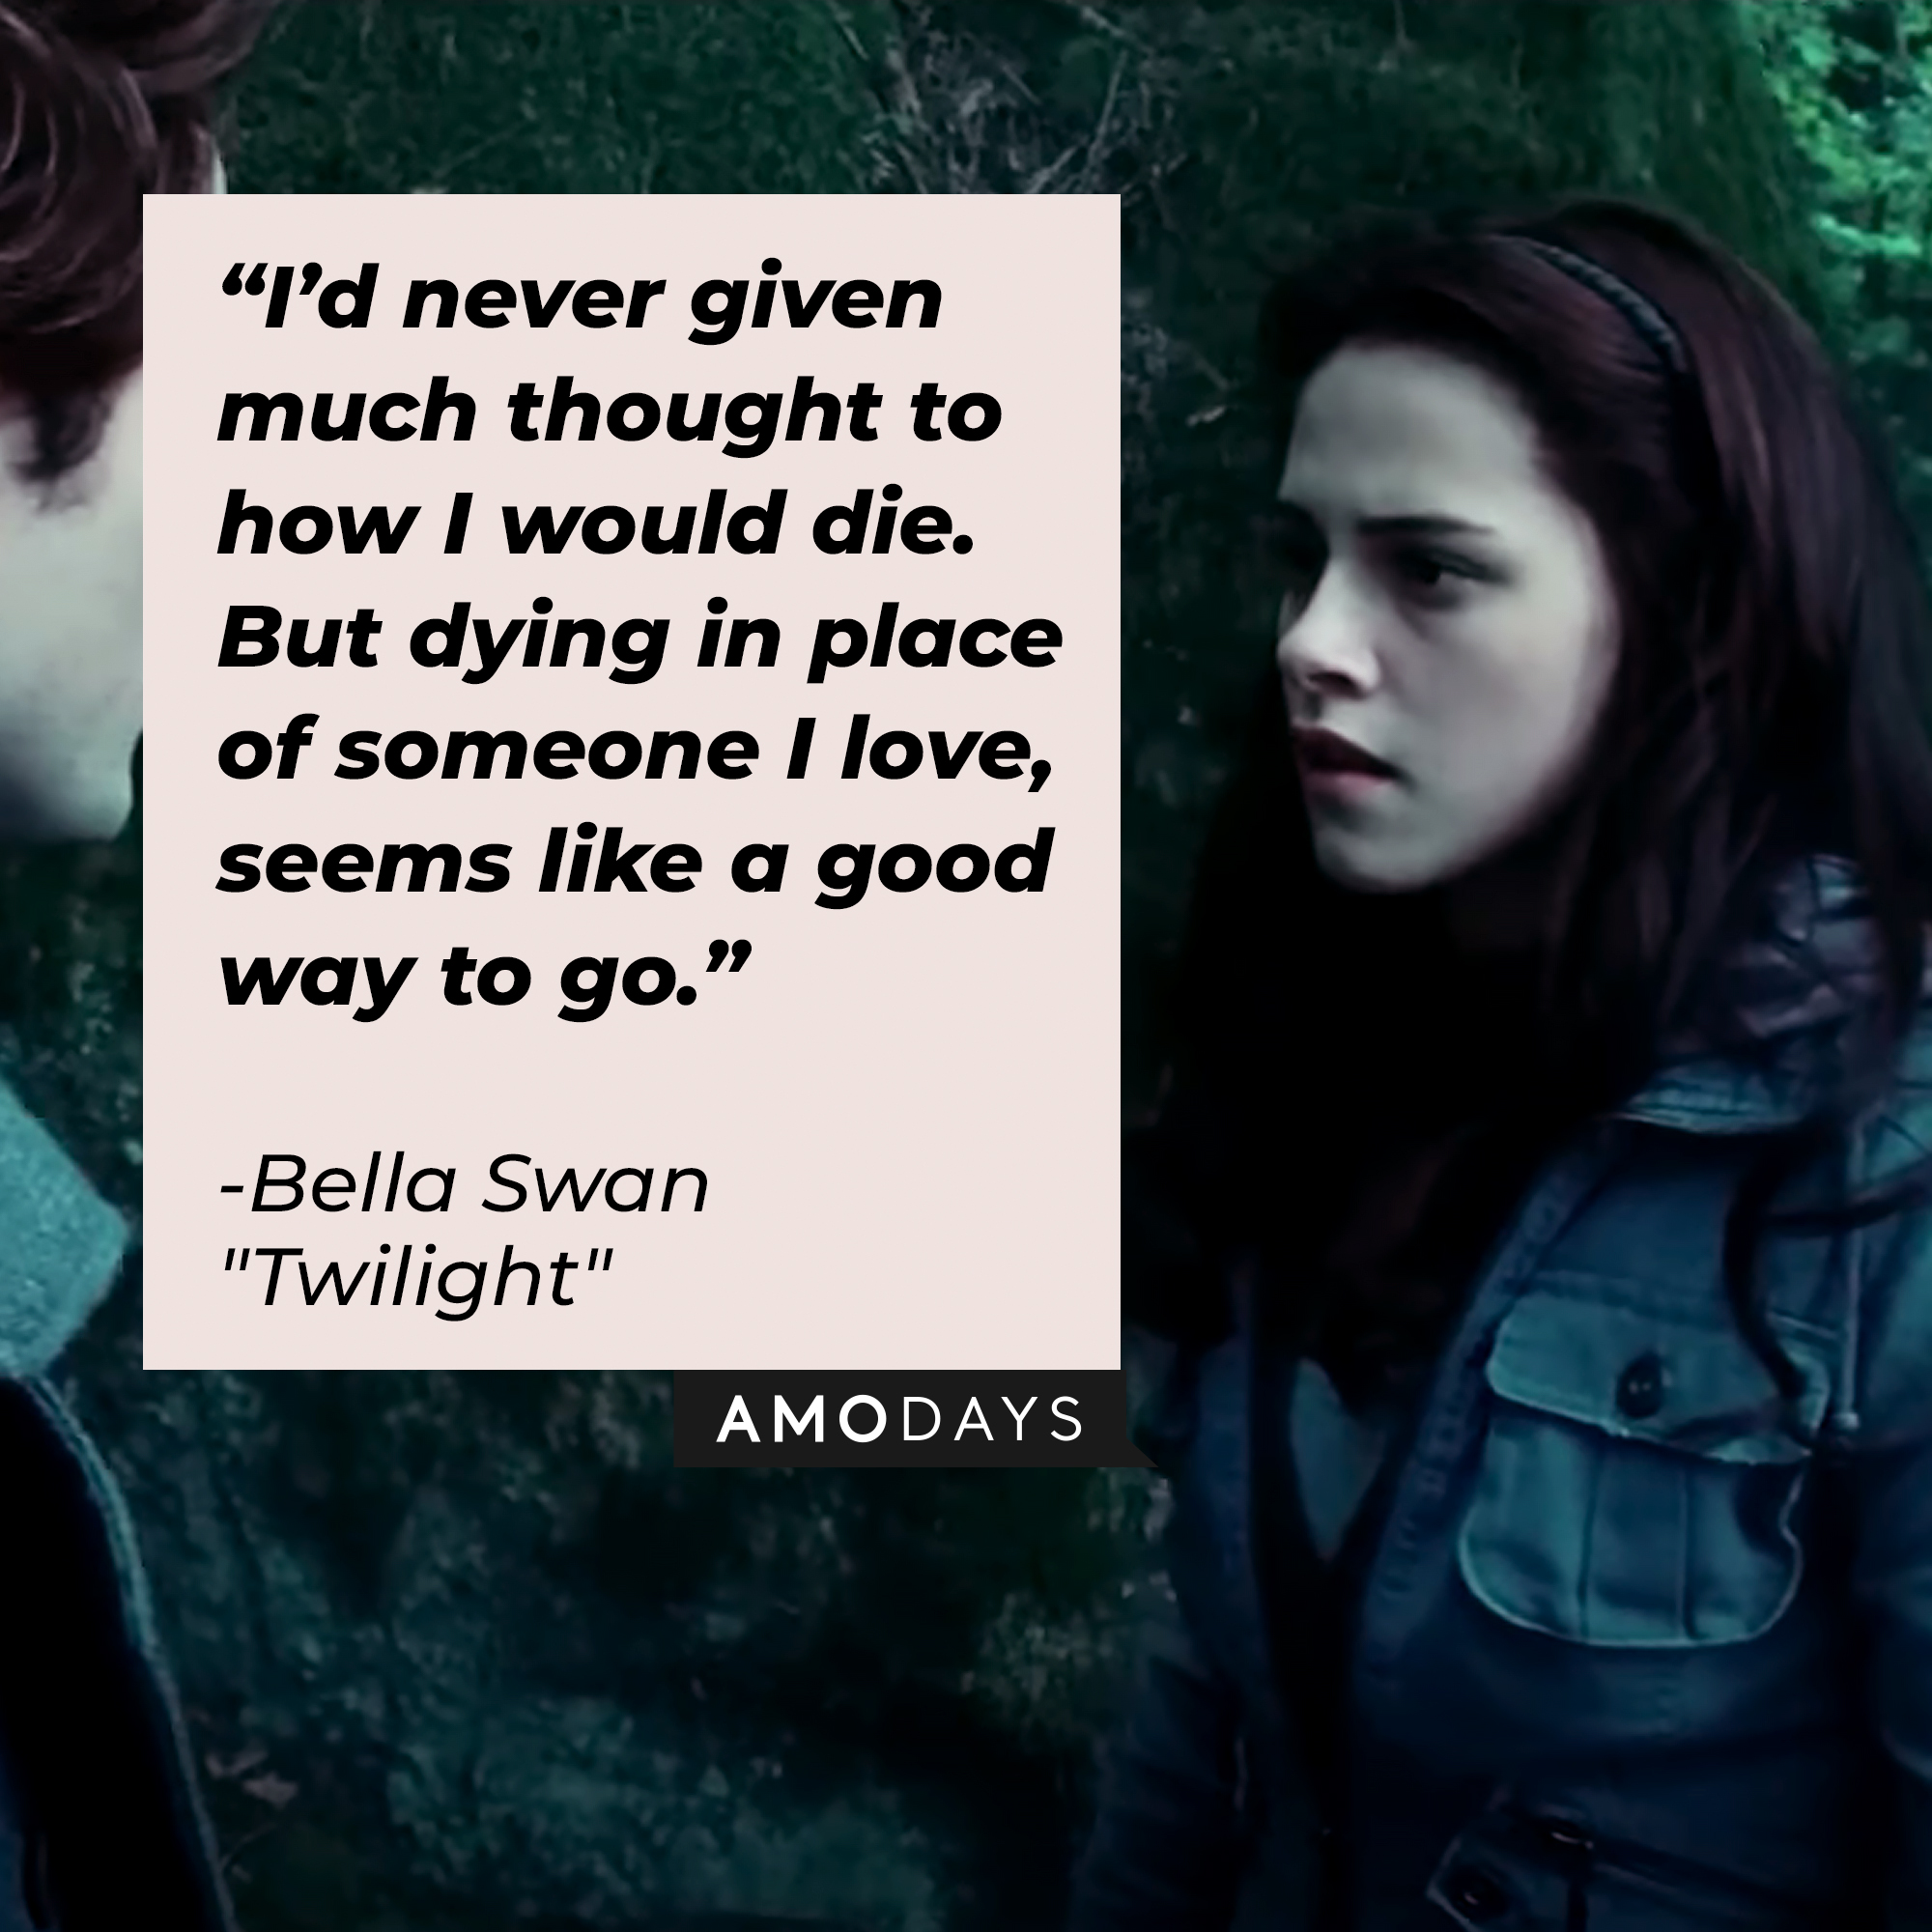 Bella Swan with her quote: “I’d never given much thought to how I would die. But dying in place of someone I love, seems like a good way to go." | Source: Facebook.com/twilight